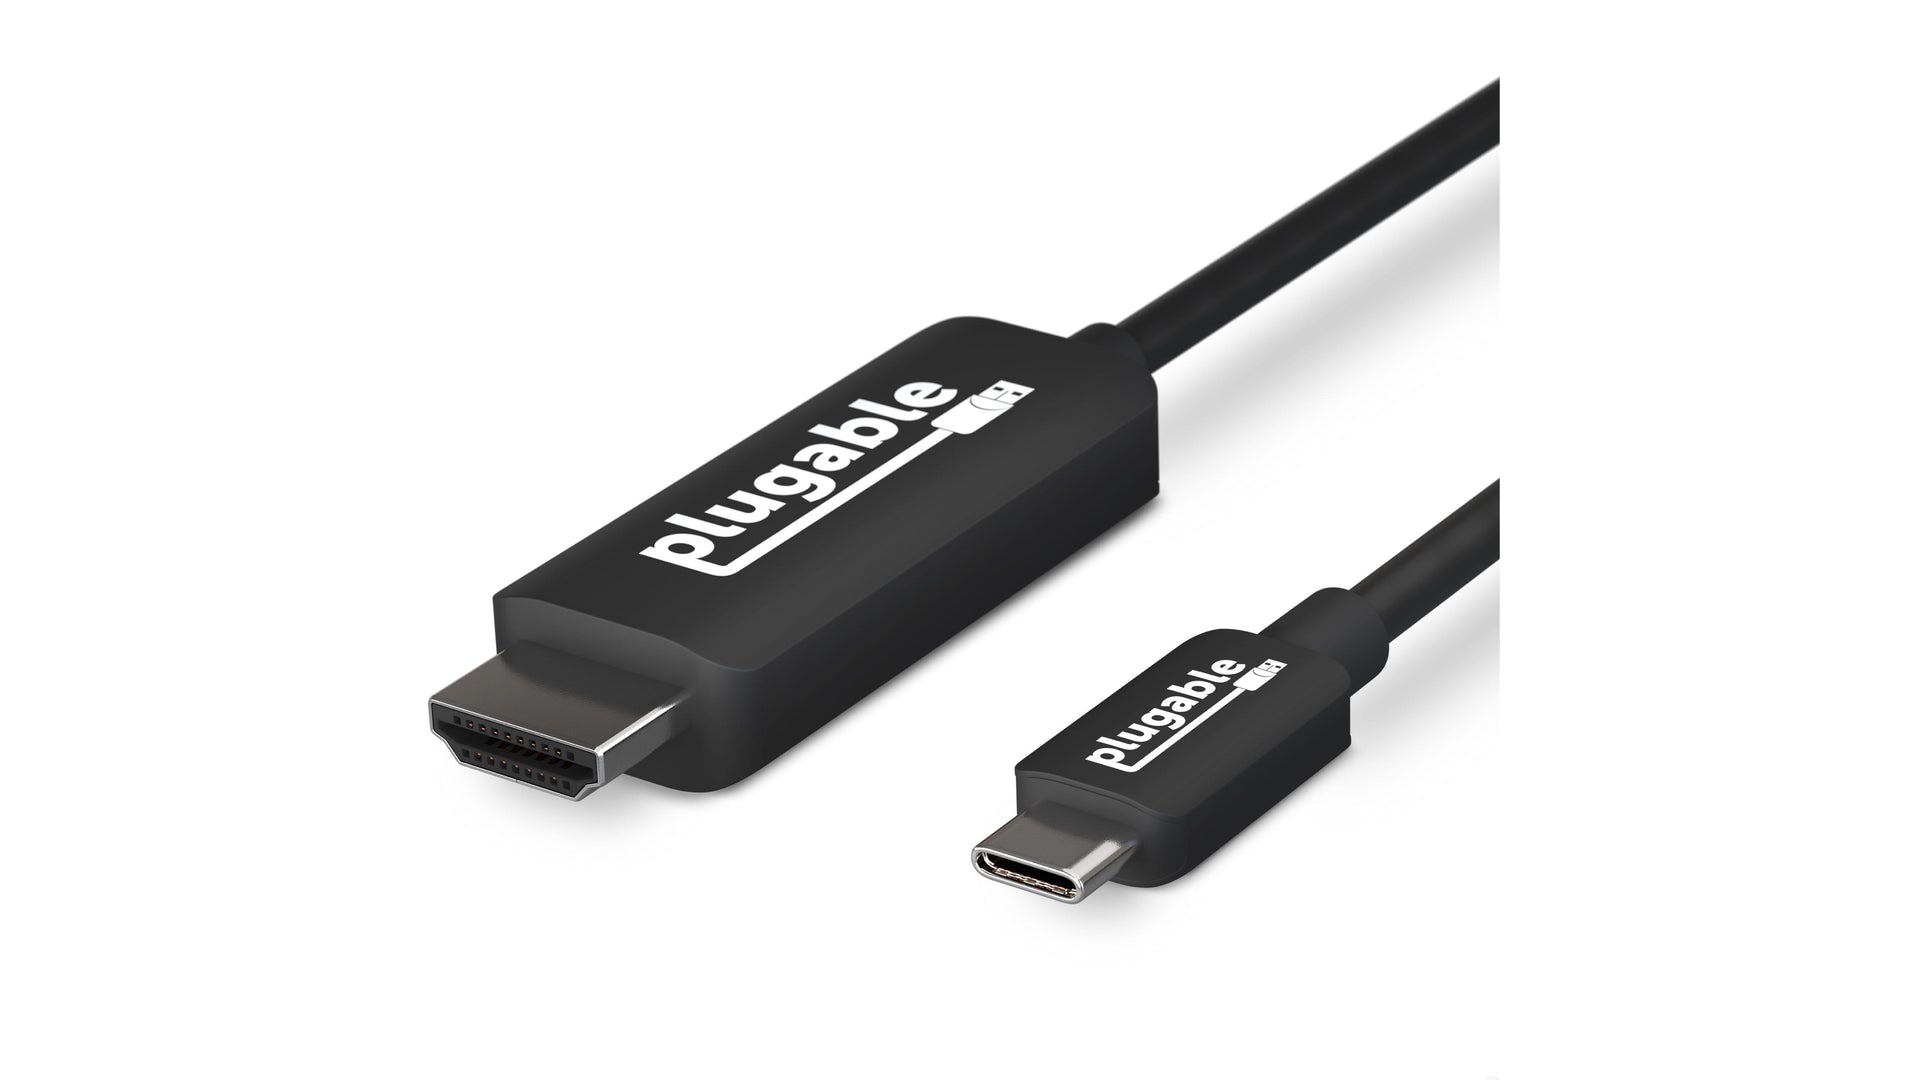 Cable USB Type-C 3.1 a HDMI 4K - 1.8M